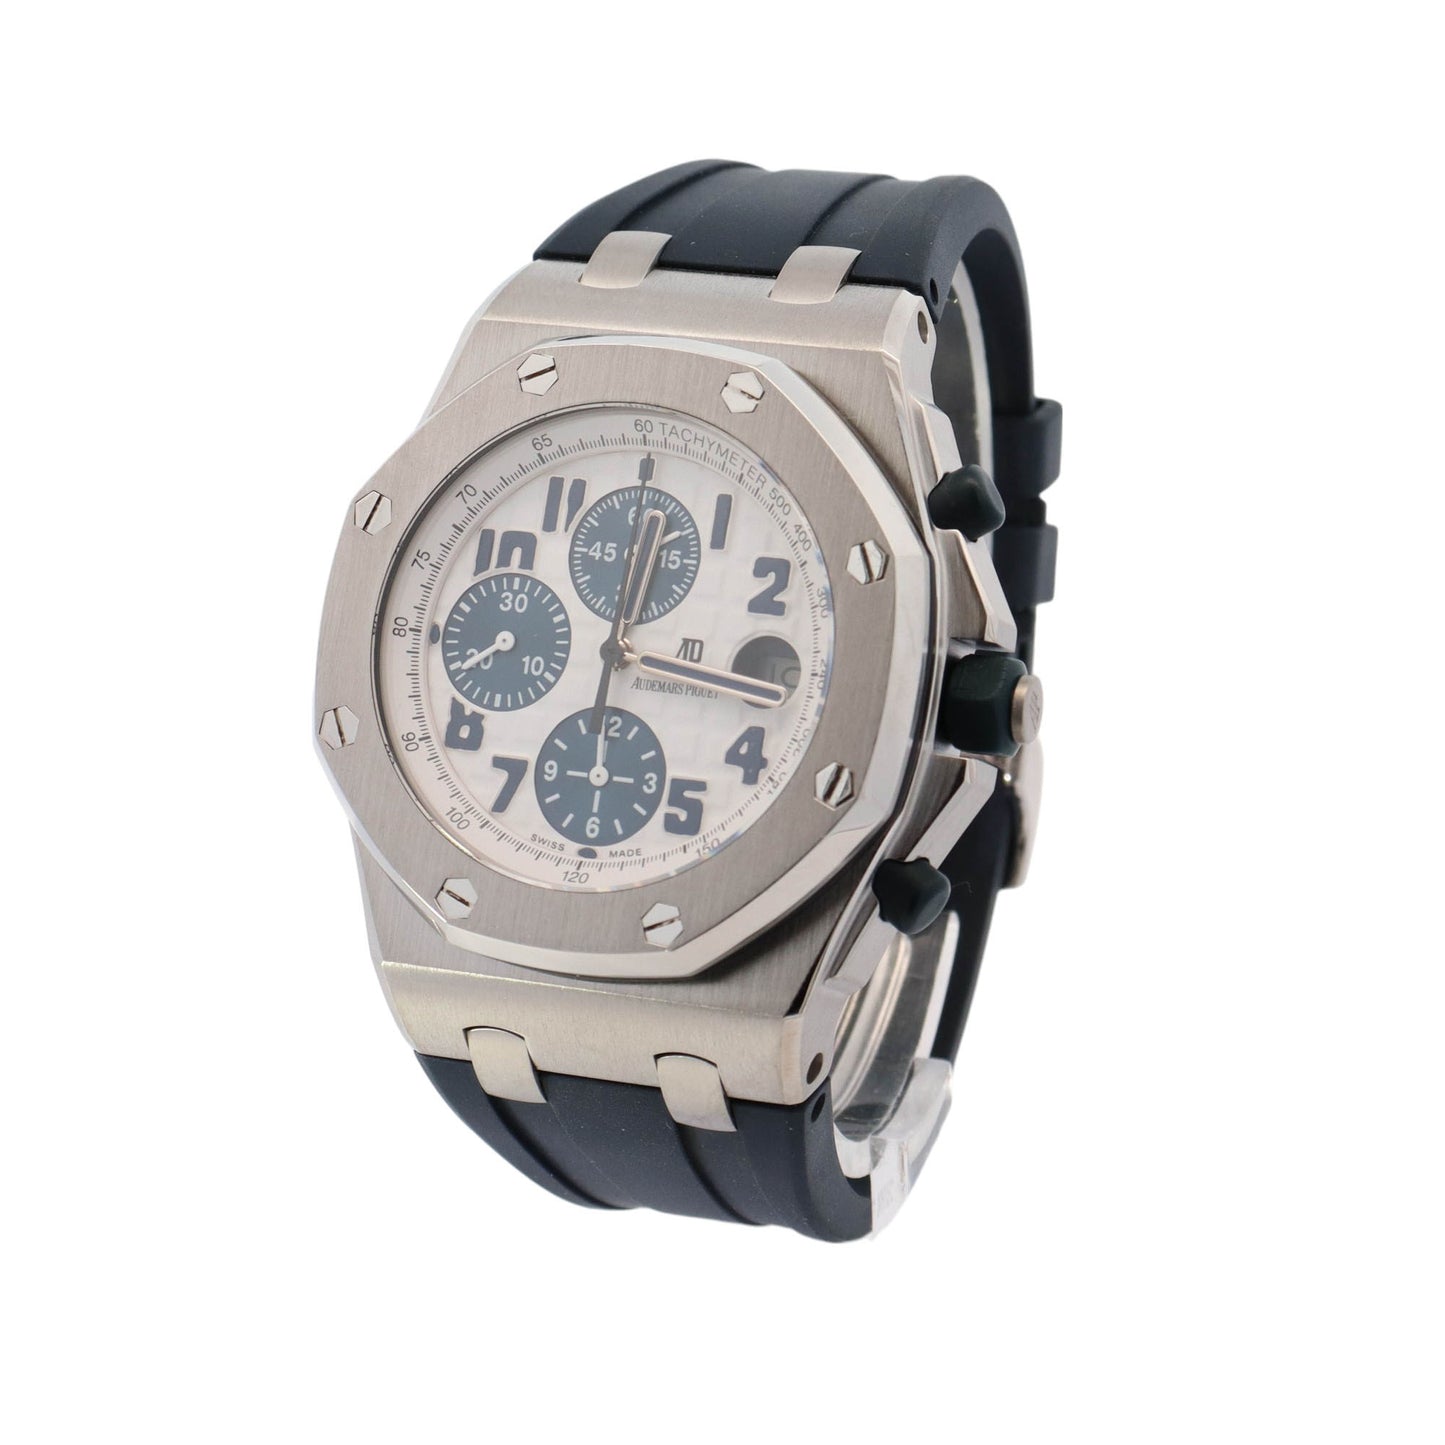 Audemars Piguet Royal Oak Offshore Stainless Steel 42mm White Chronograph Dial Watch Reference #: 26020ST.OO.D020IN.01.A - Happy Jewelers Fine Jewelry Lifetime Warranty